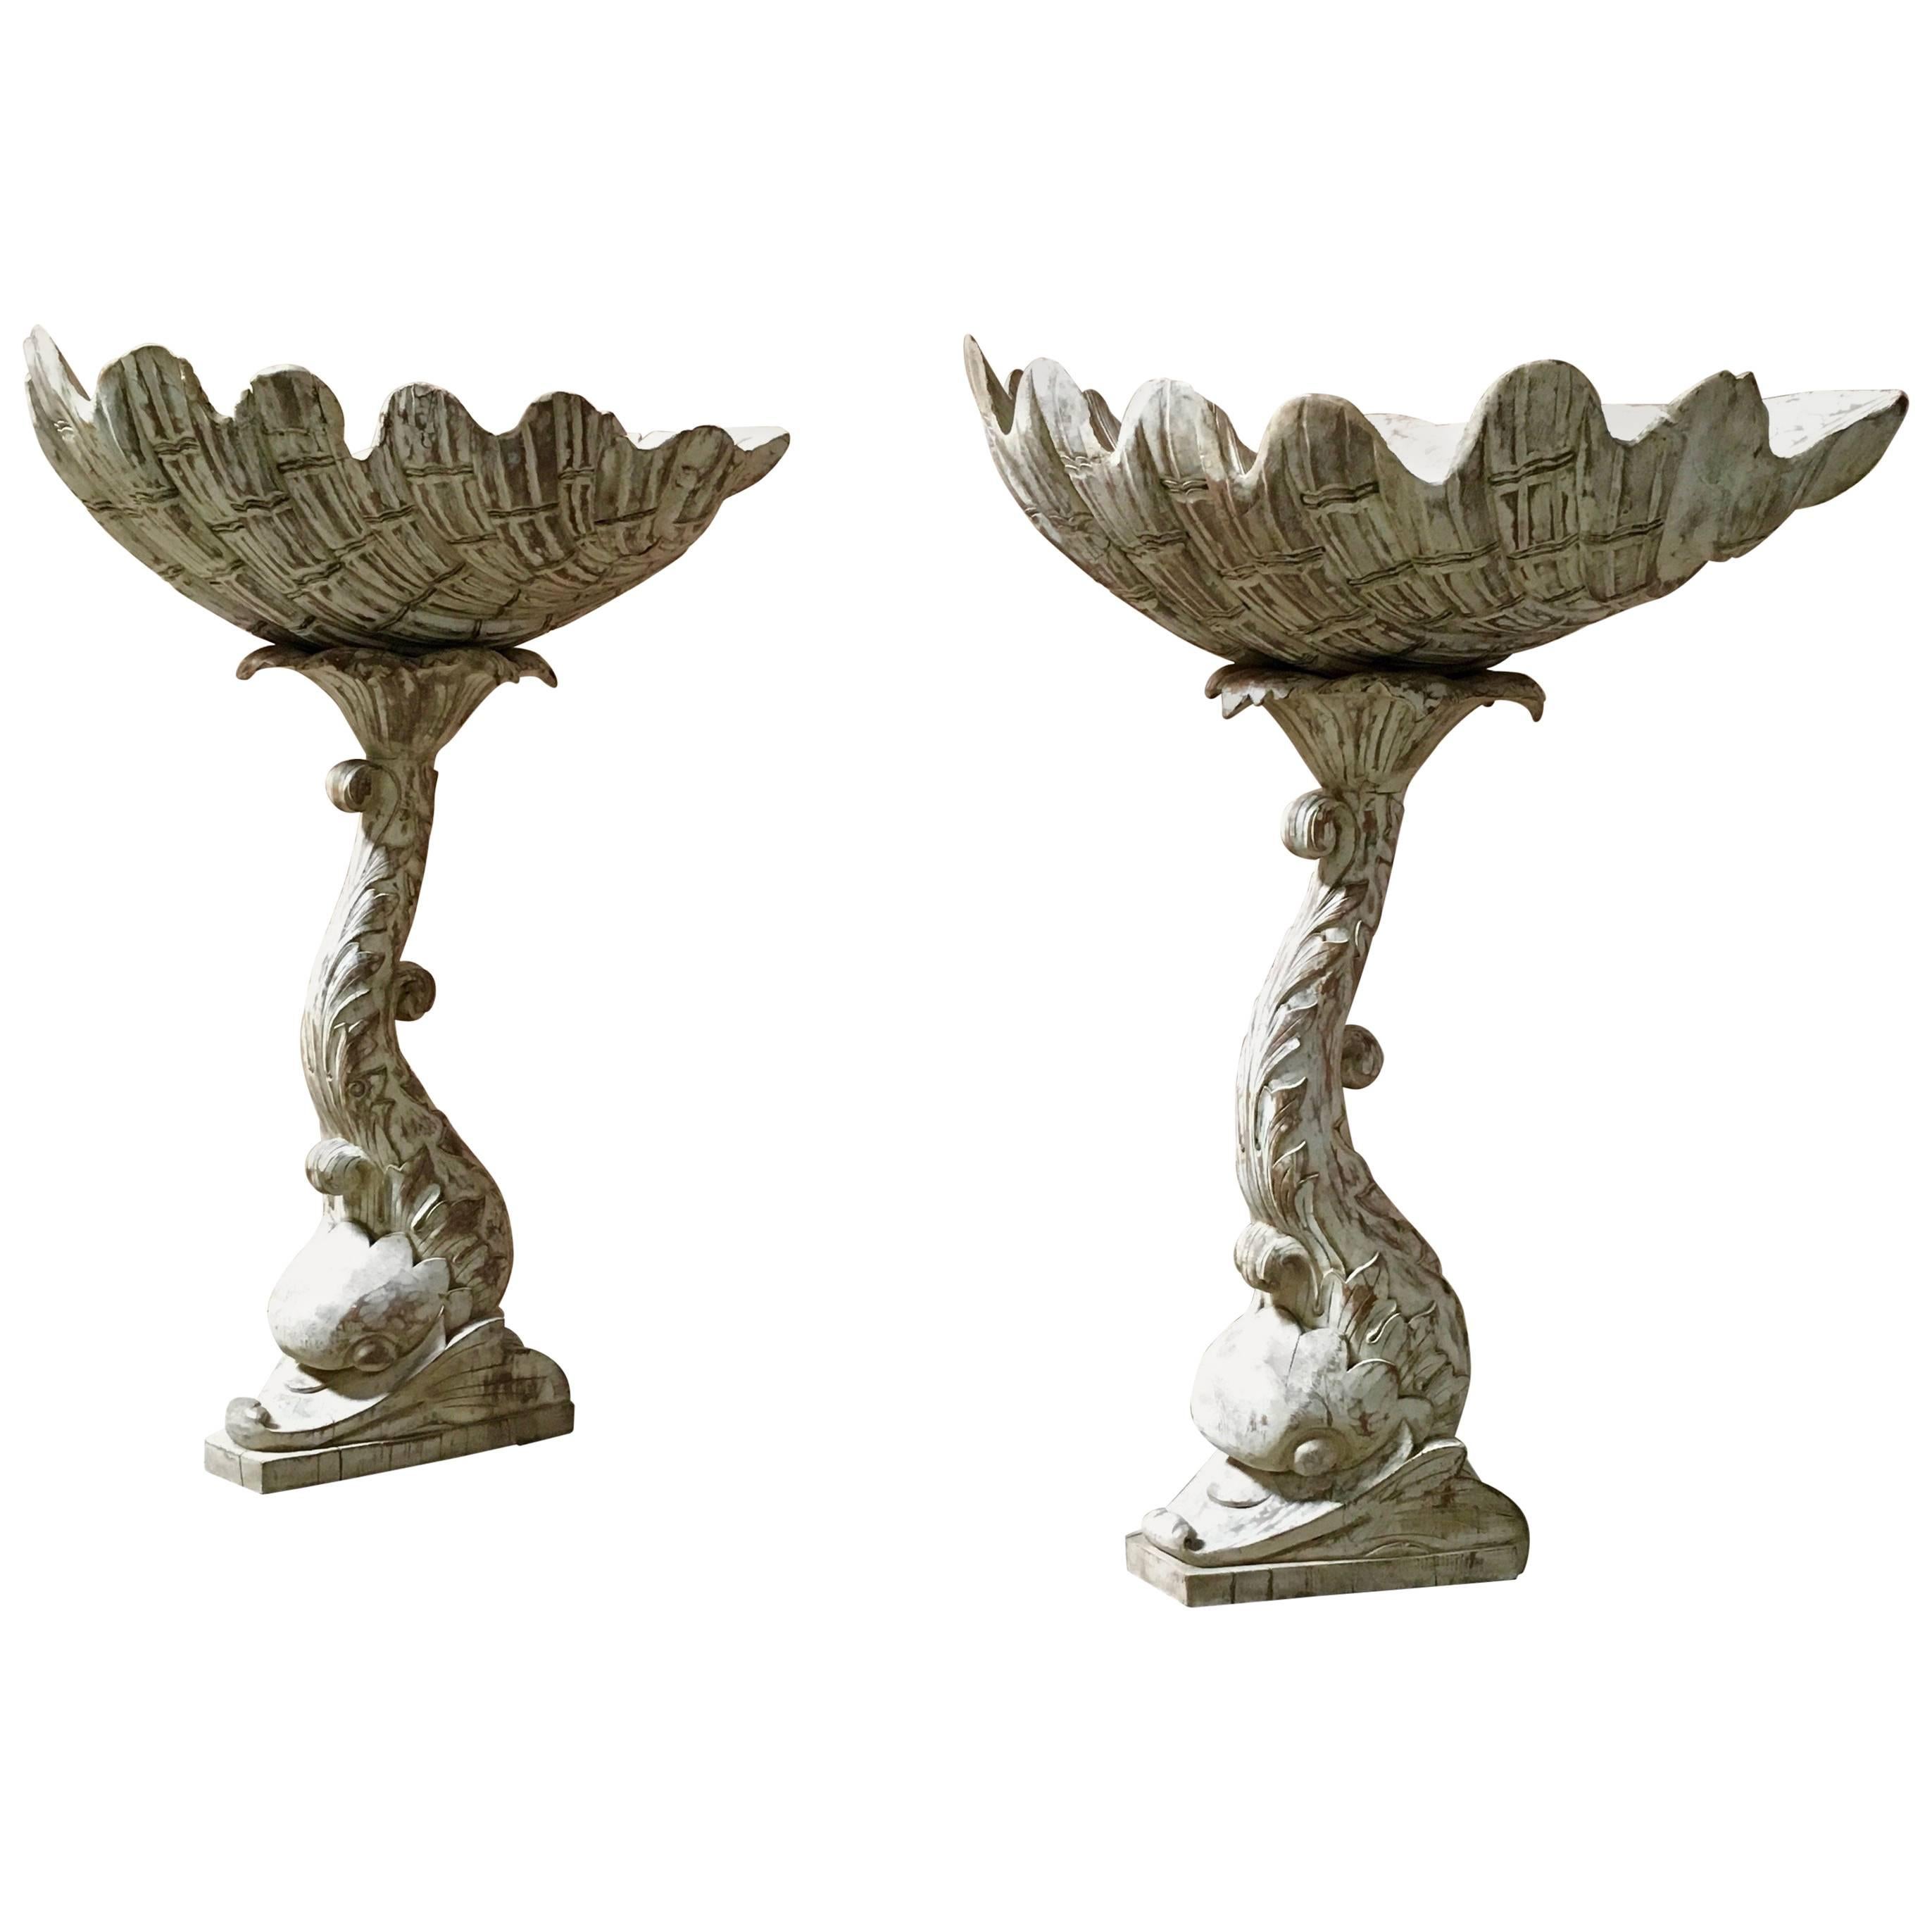 Pair of Hand-Carved Grotto Style Plant Stands